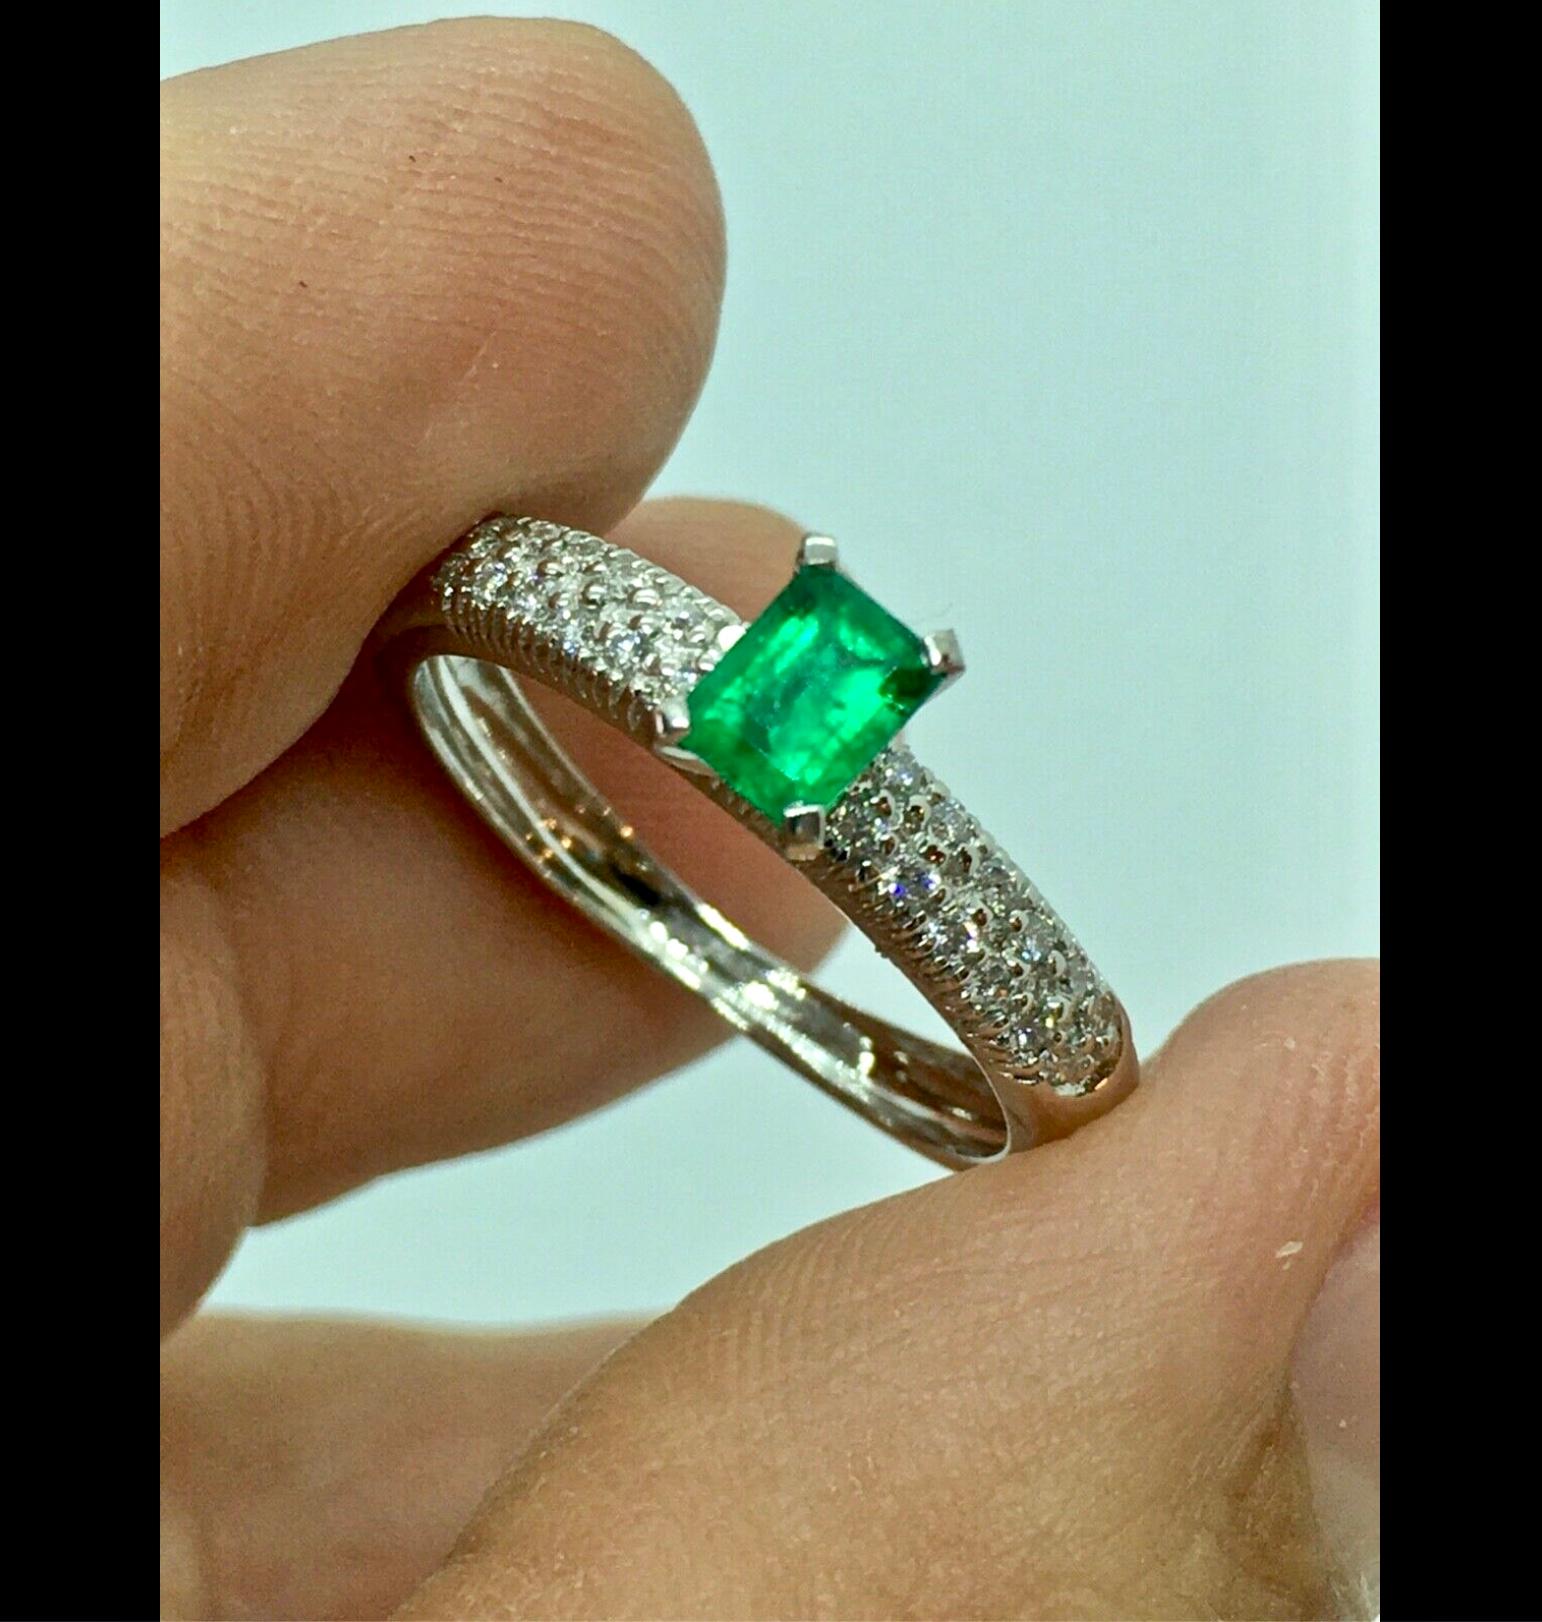 A Fine Natural Colombian Emerald Pave Diamond Engagement Ring 18K White Gold
Center High-Quality Natural Colombian Emerald, Emerald Cut 0.50 Carat, Vivid Medium intense Green
Side Natural Micro pave set Diamonds 0.40 Carat, Clarity VS, Color